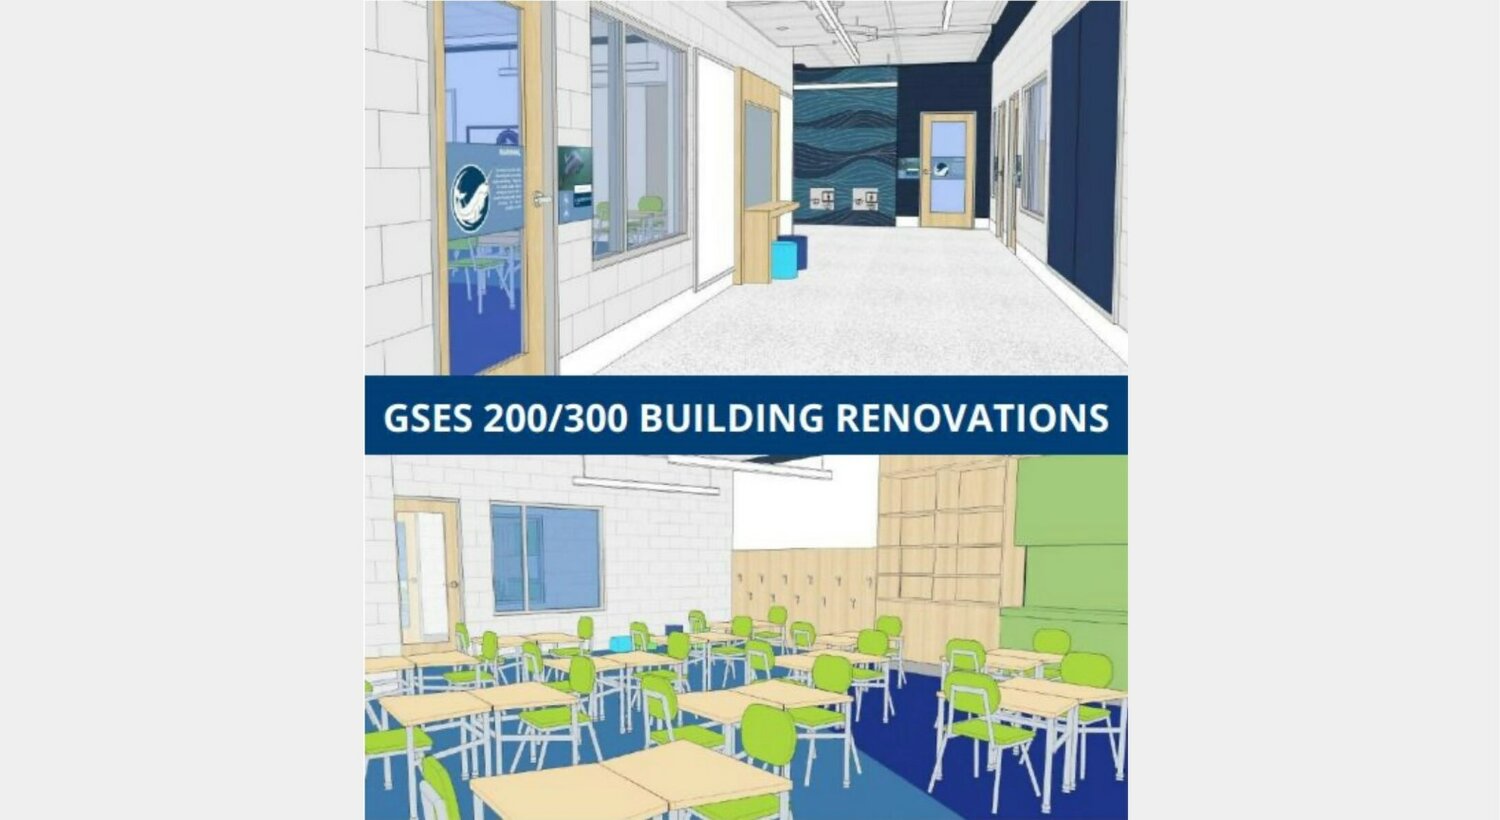 After the City of Gulf Shores announced that Gulf Shores Elementary School was awarded a construction contract to renovate the 200 and 300 buildings on campus, a rendering of the work was provided. The renovations are expected to be complete before next school year.